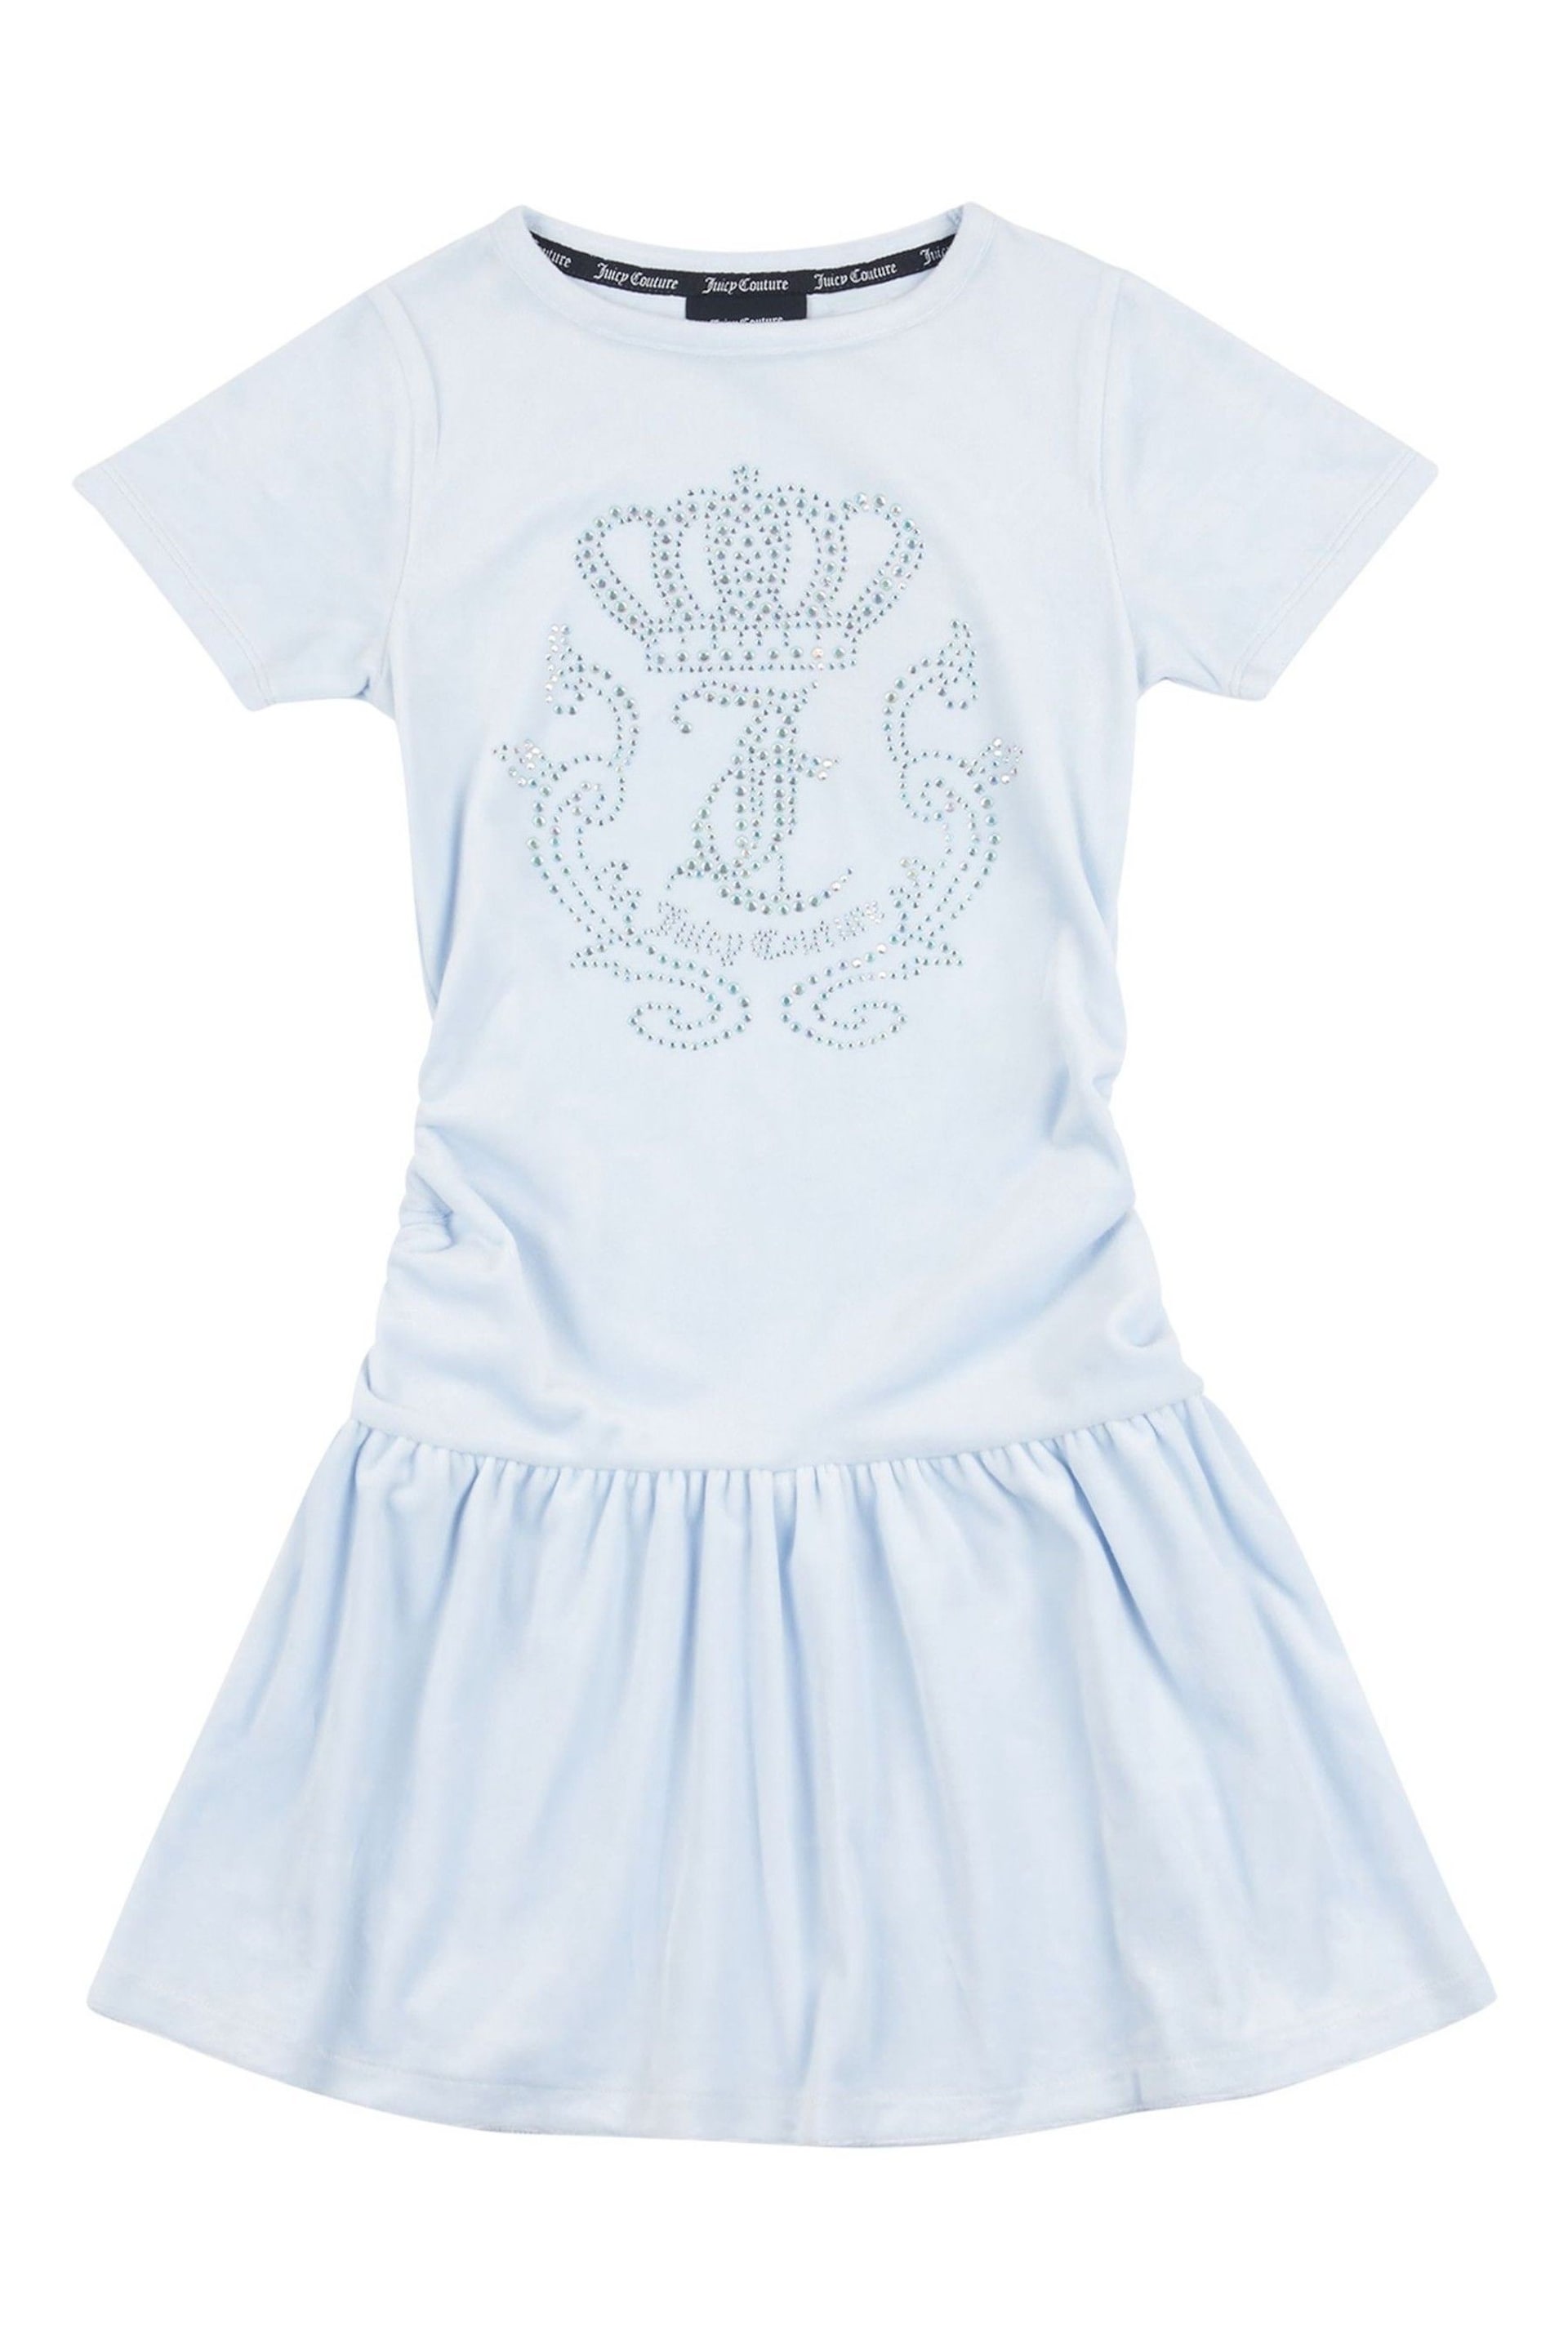 Juicy Couture Girls Blue Diamante Crown Dress - Image 5 of 7